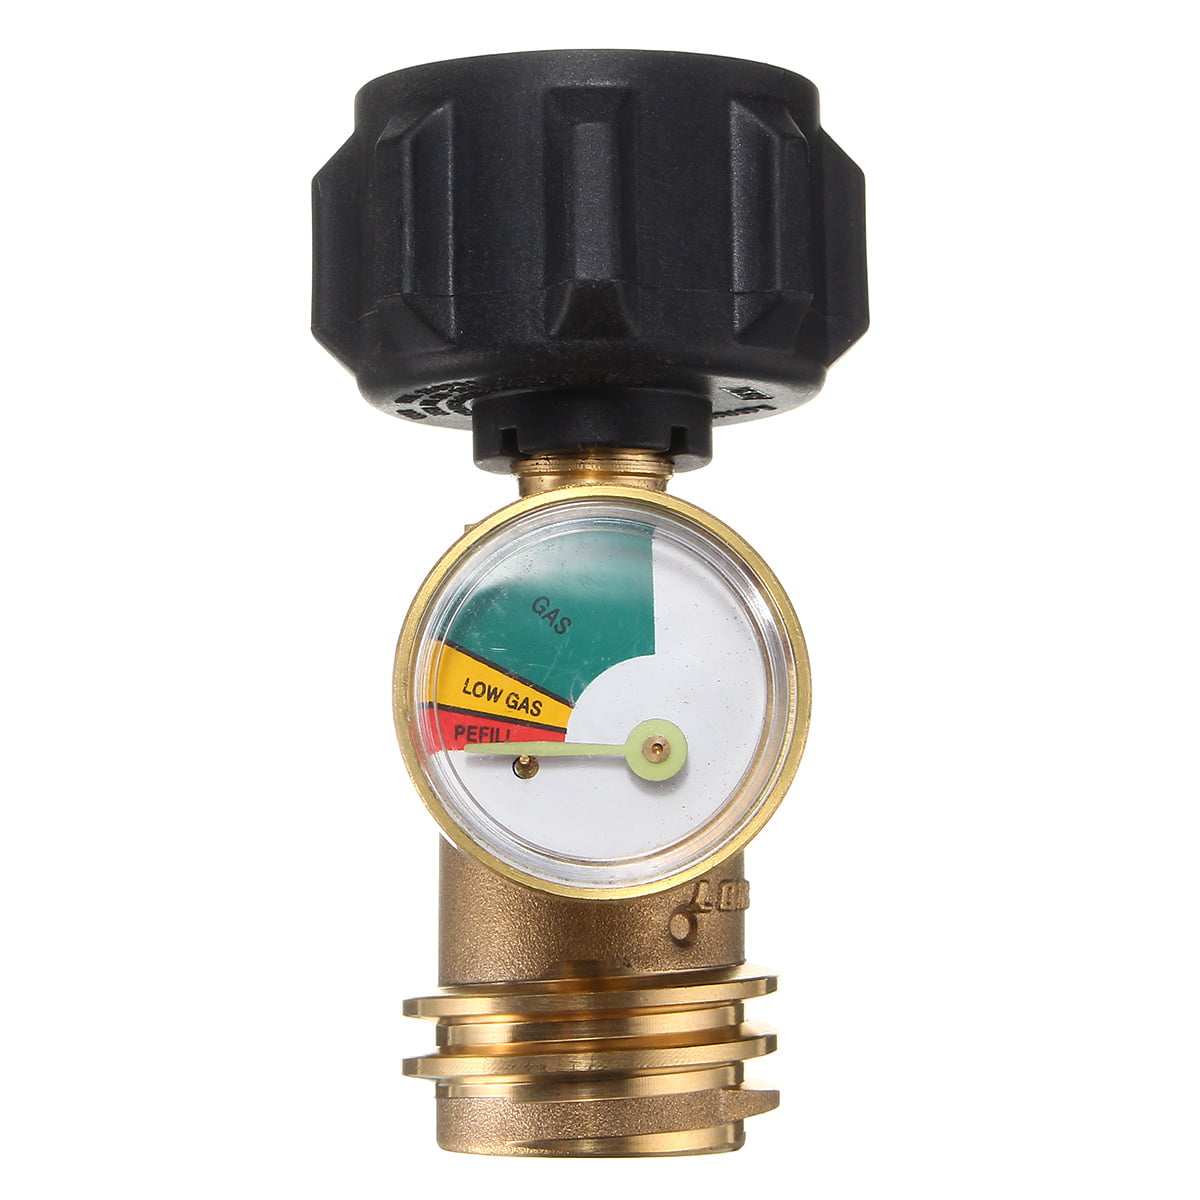 Details about   Propane Tank Gauge Grill BBQ RV Pressure Brass Adapter Gas Level Meter Indicator 